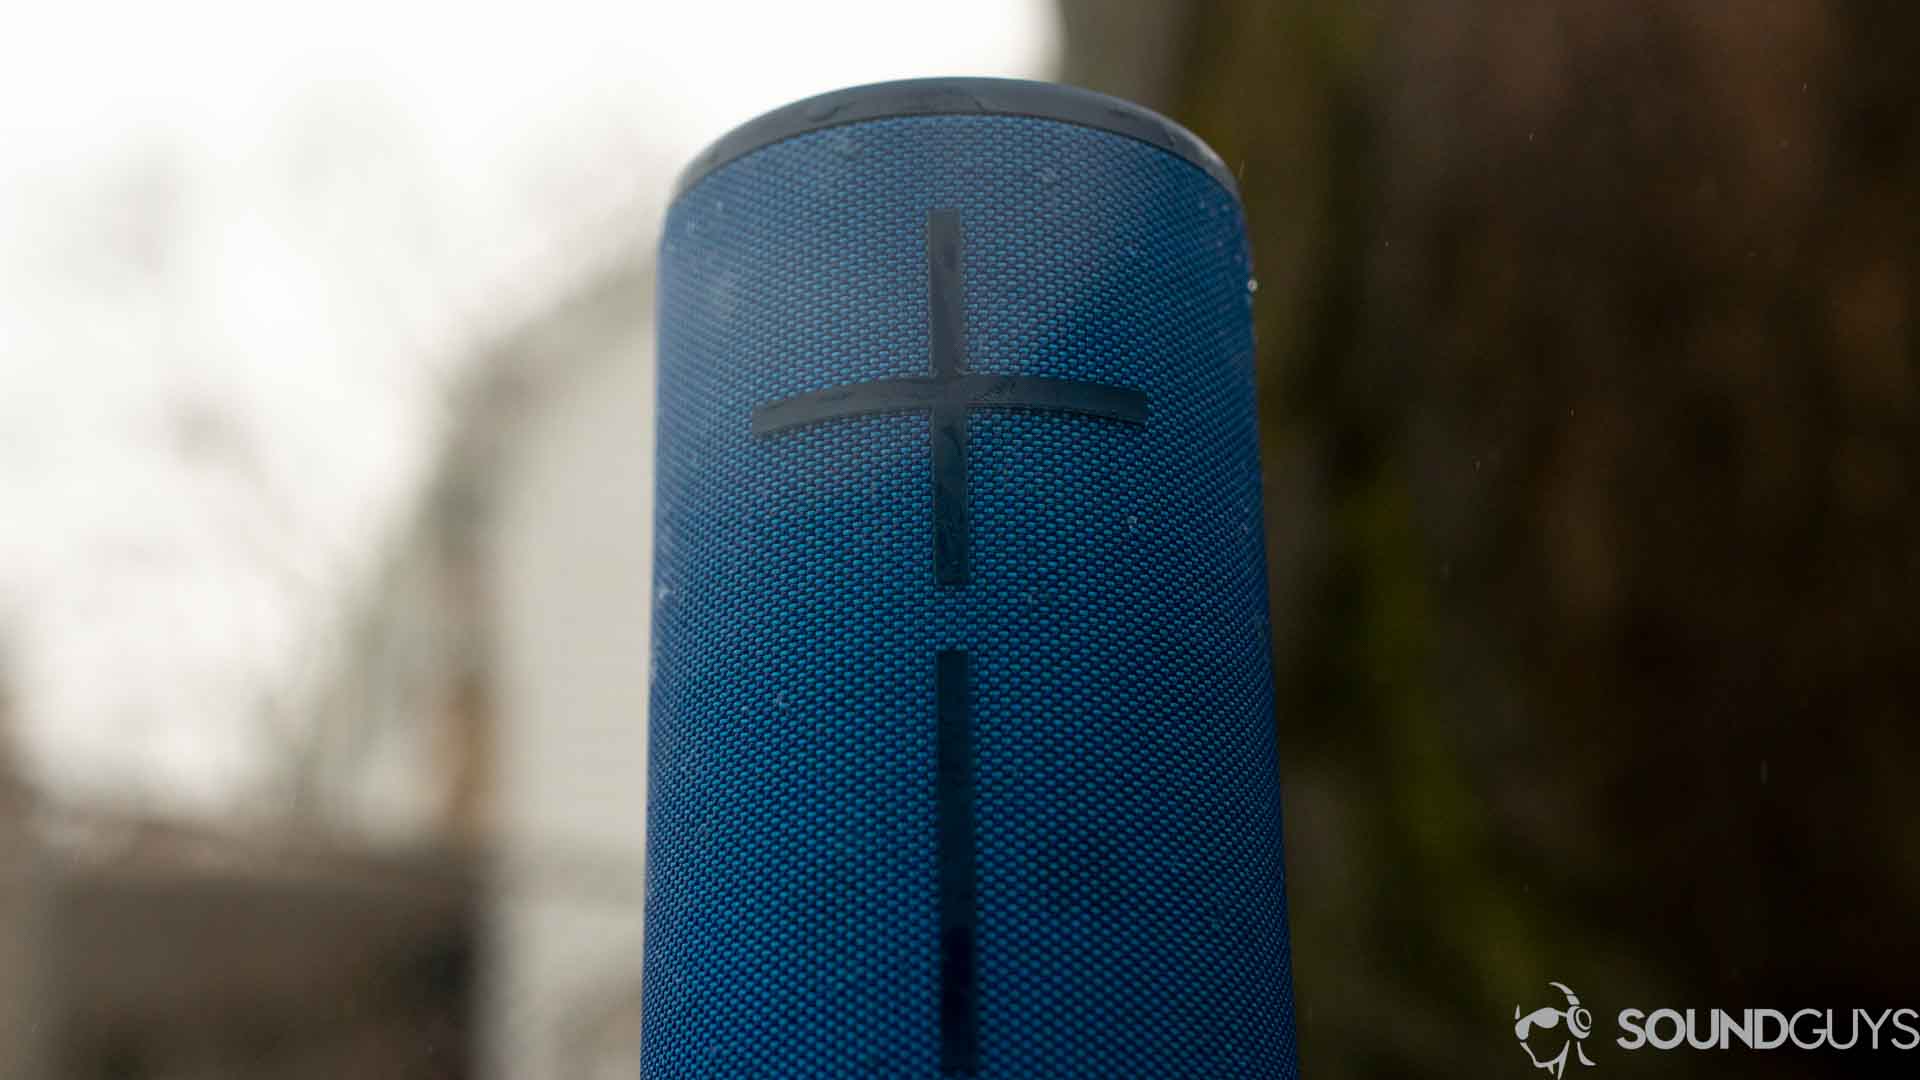 The UE Boom 3 Bluetooth speaker in blue against a wood and white background.